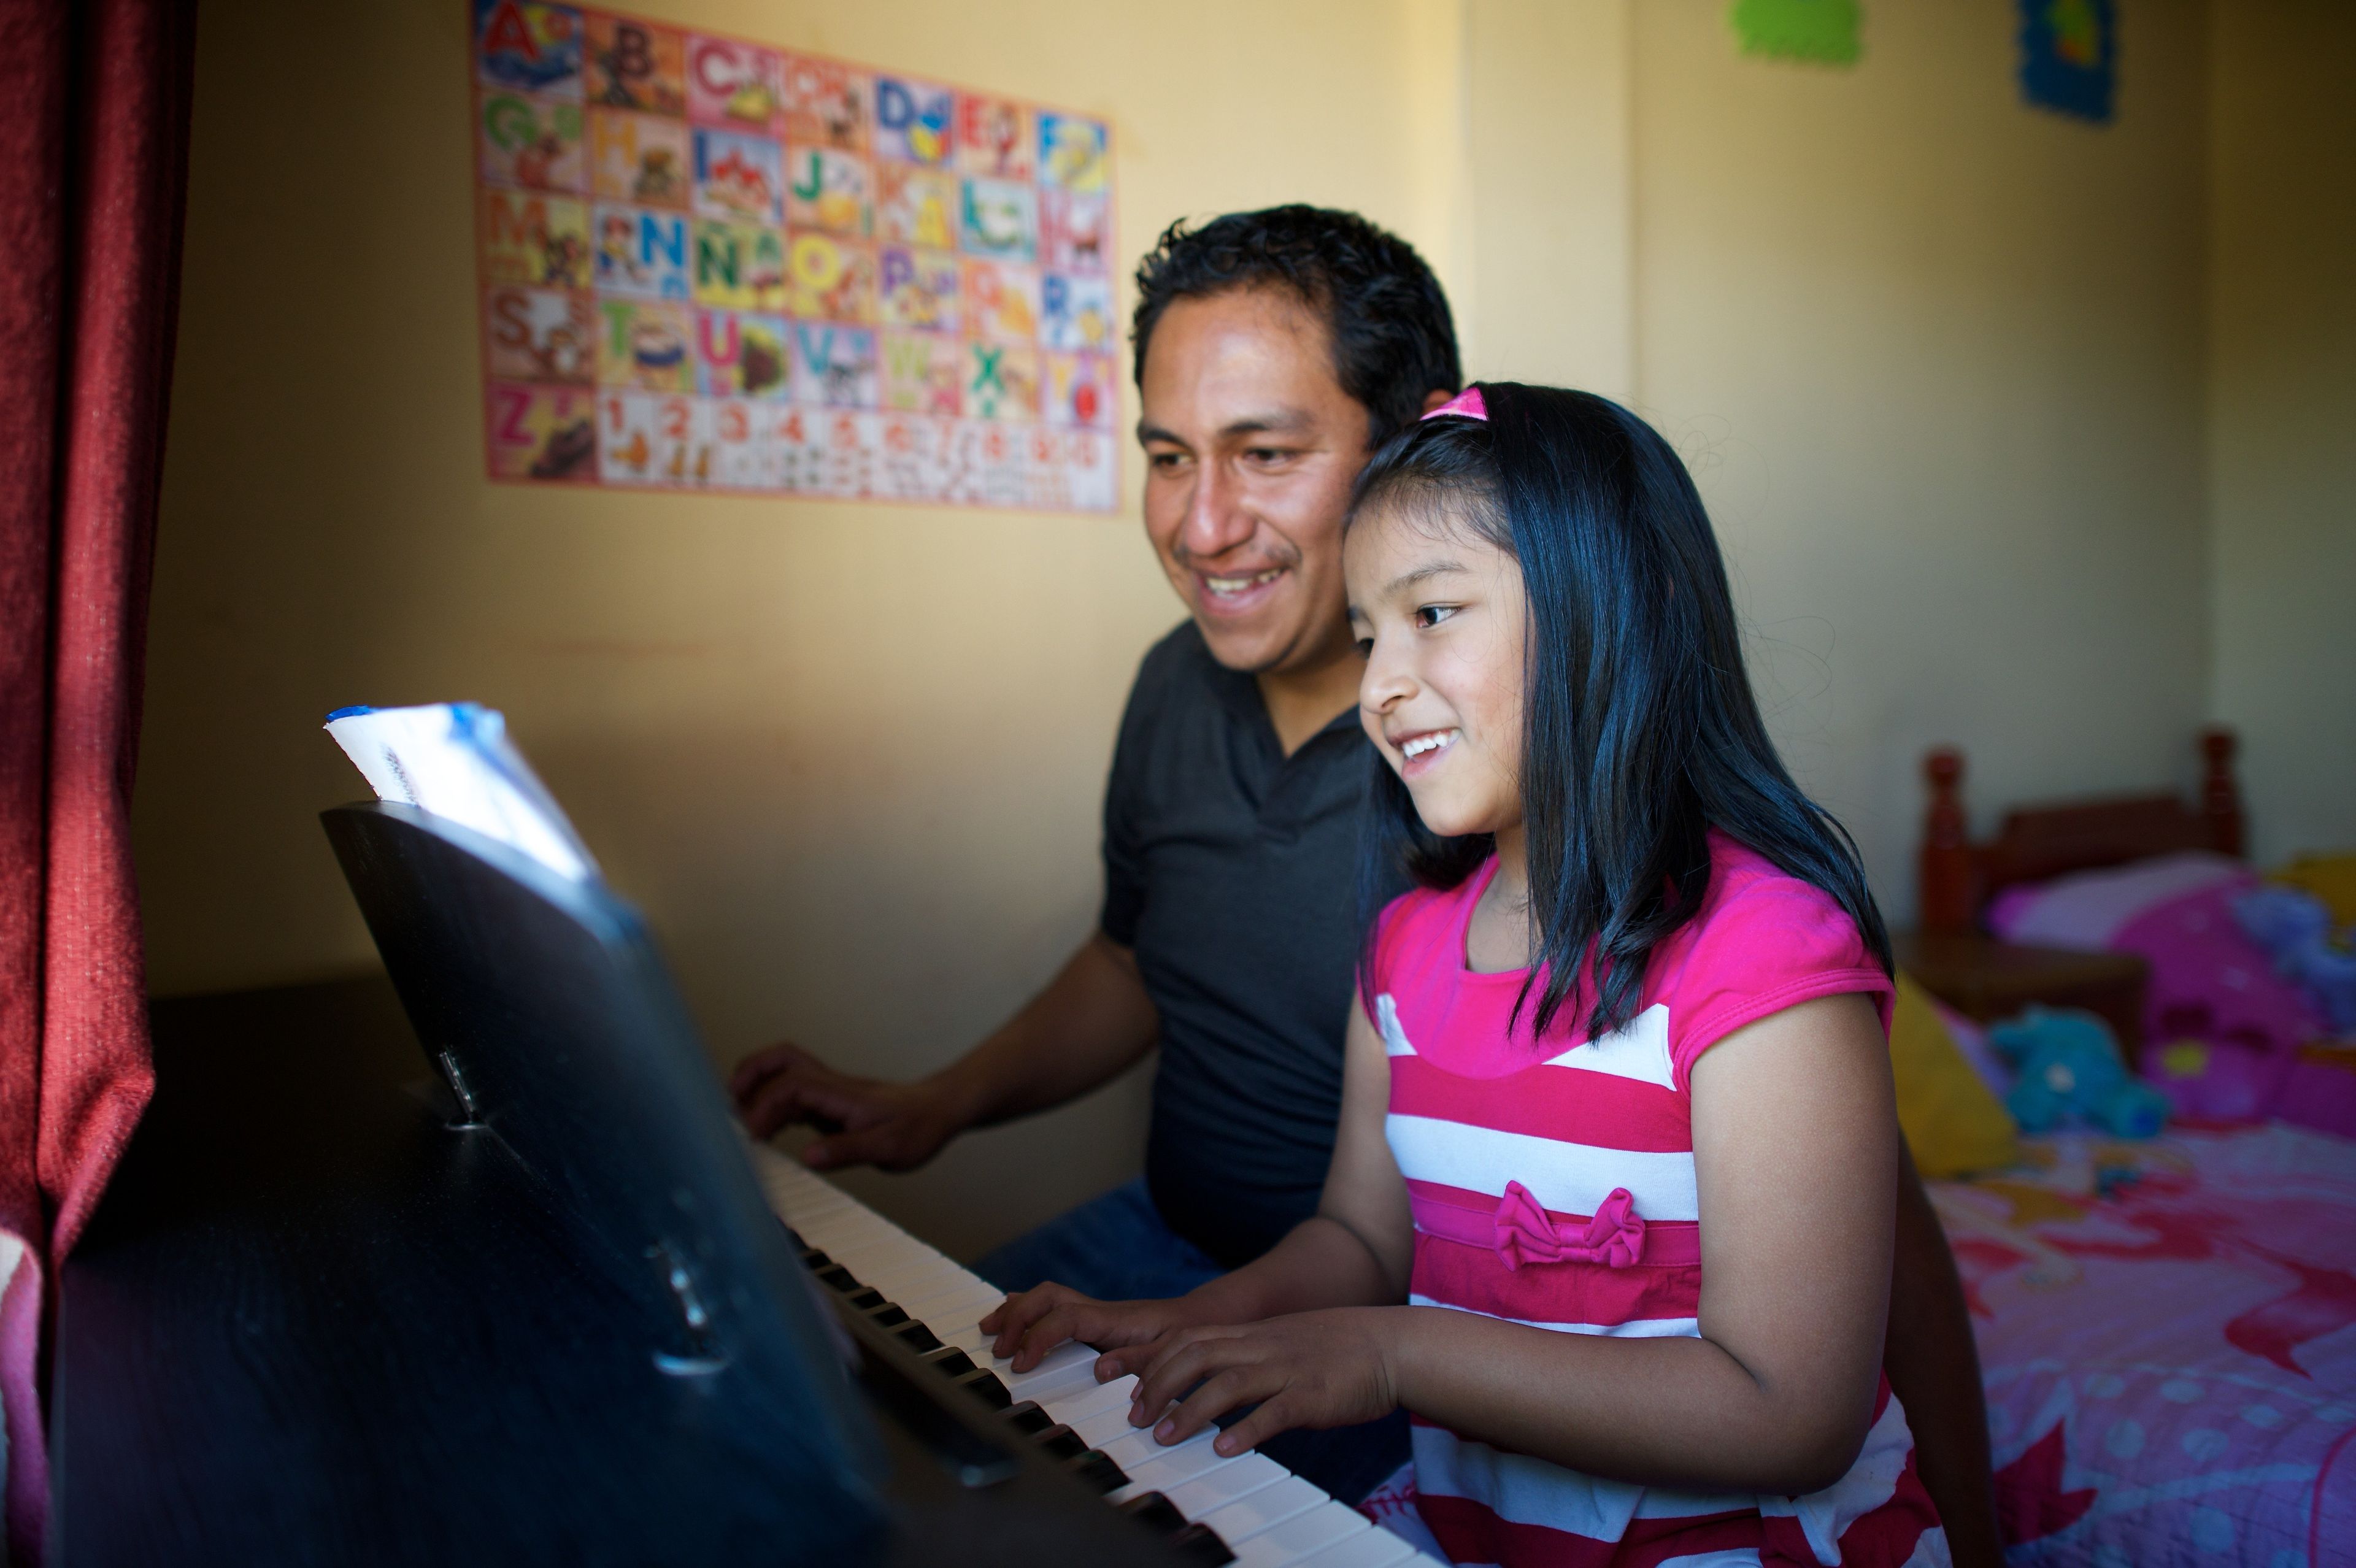 A father sits next to his daughter at a piano while they play together.